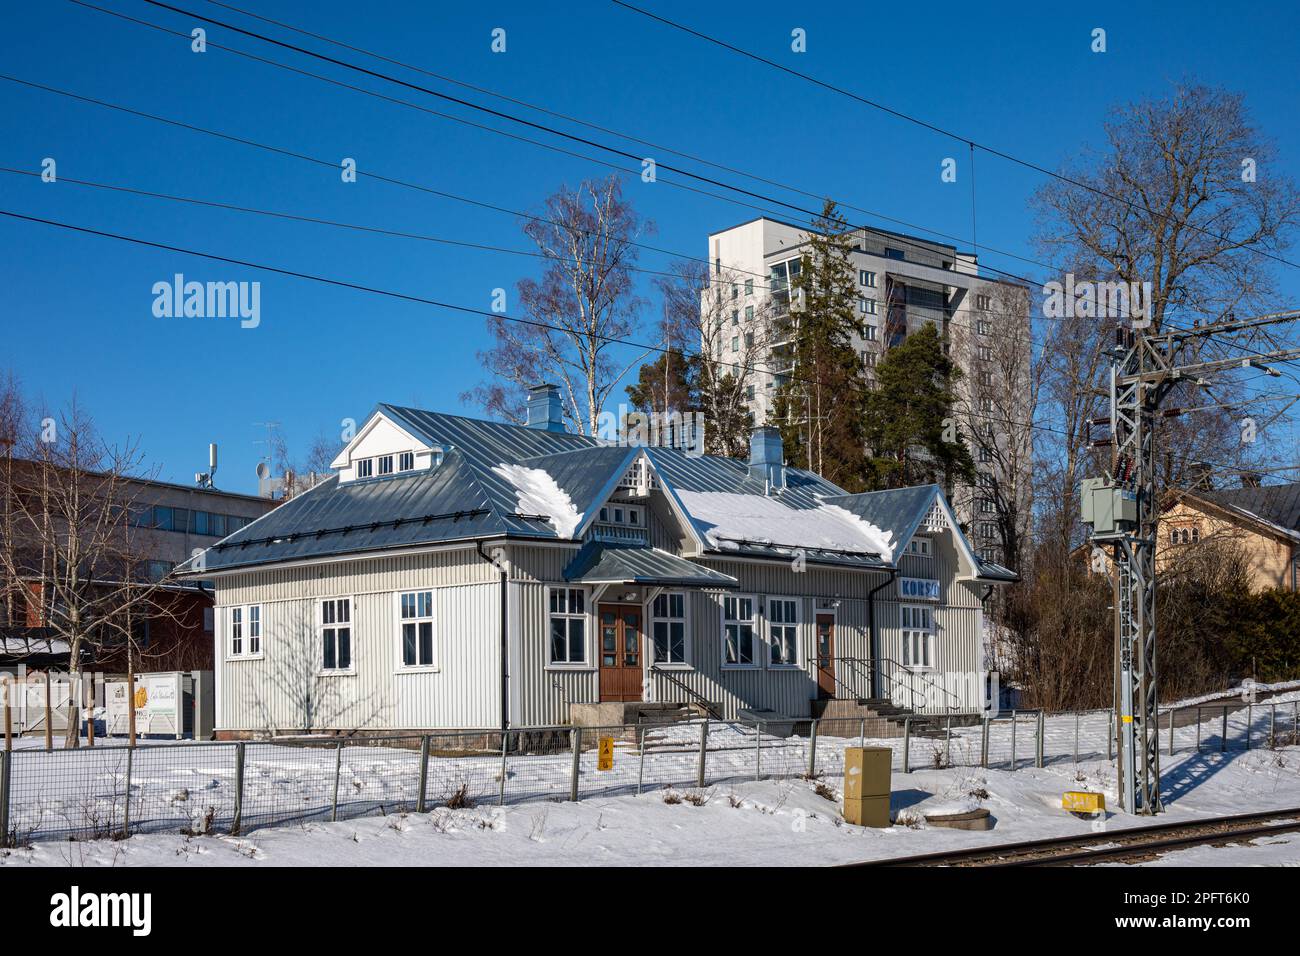 Old wooden building, former railway station, against clear blue sky and a high-rise residential building in Korso district of Vantaa, Finland Stock Photo